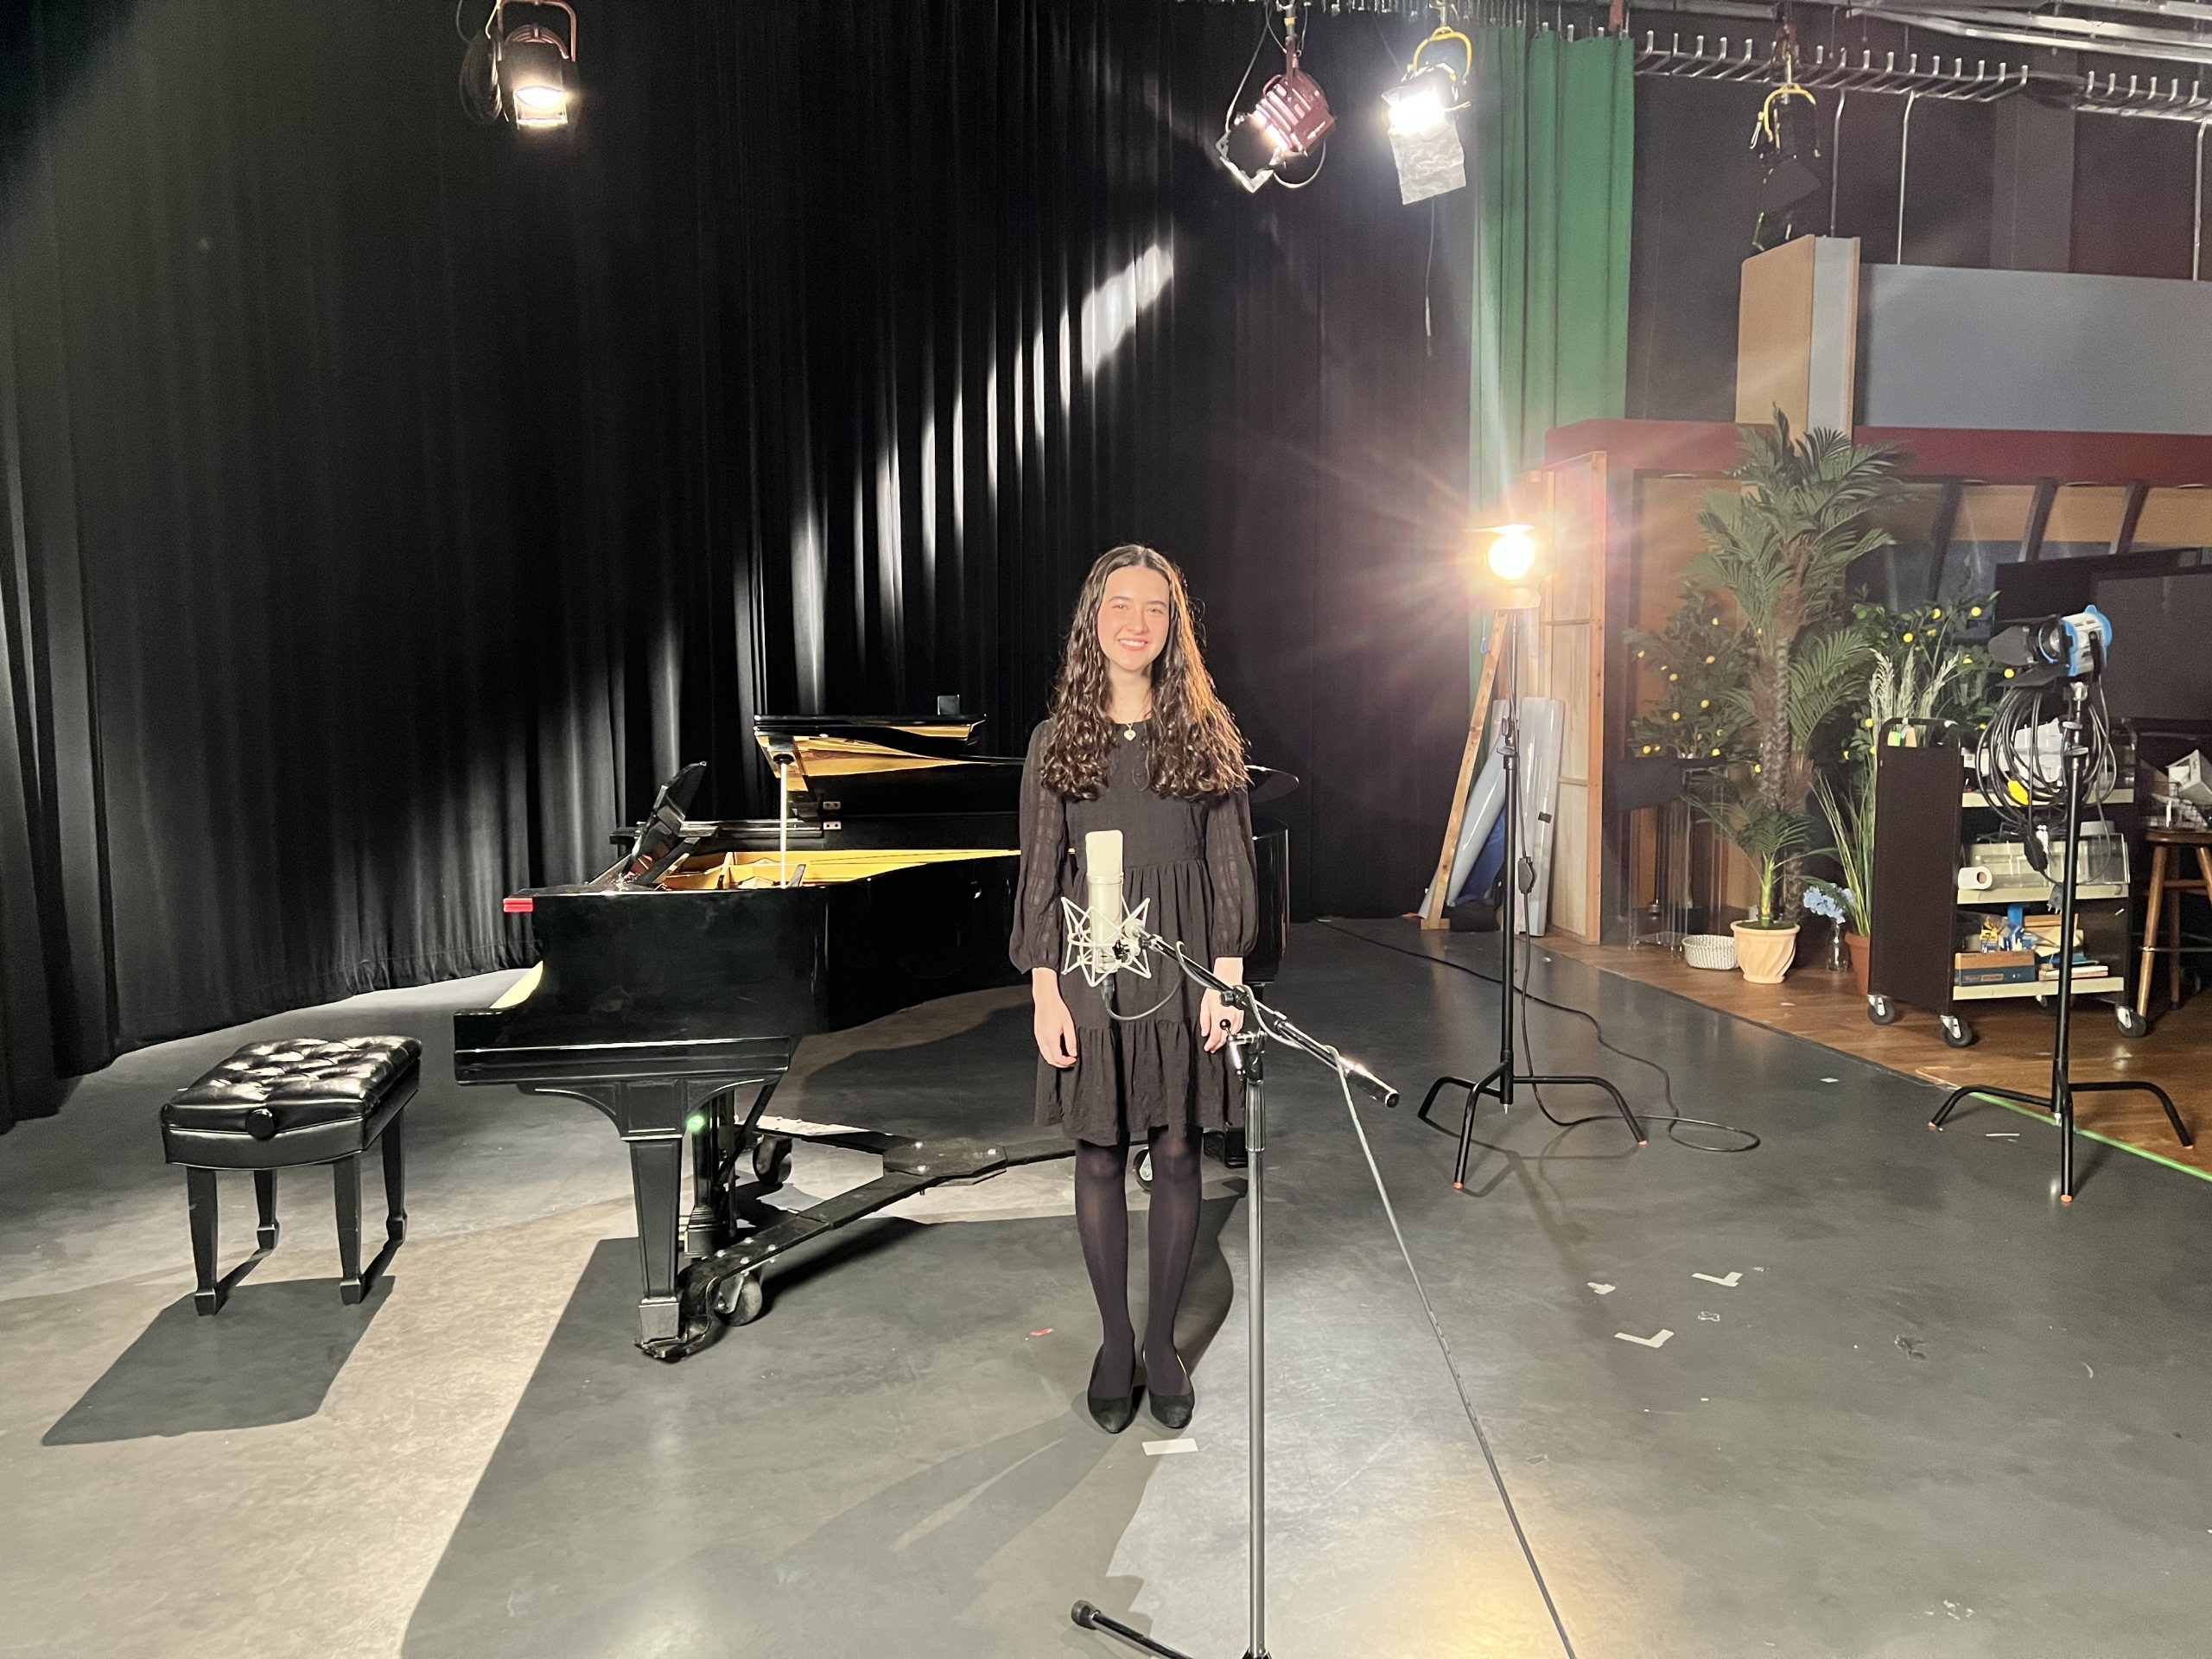 Sophie Spindler on set at WMHT as the January Classical Student Musician of the Month.